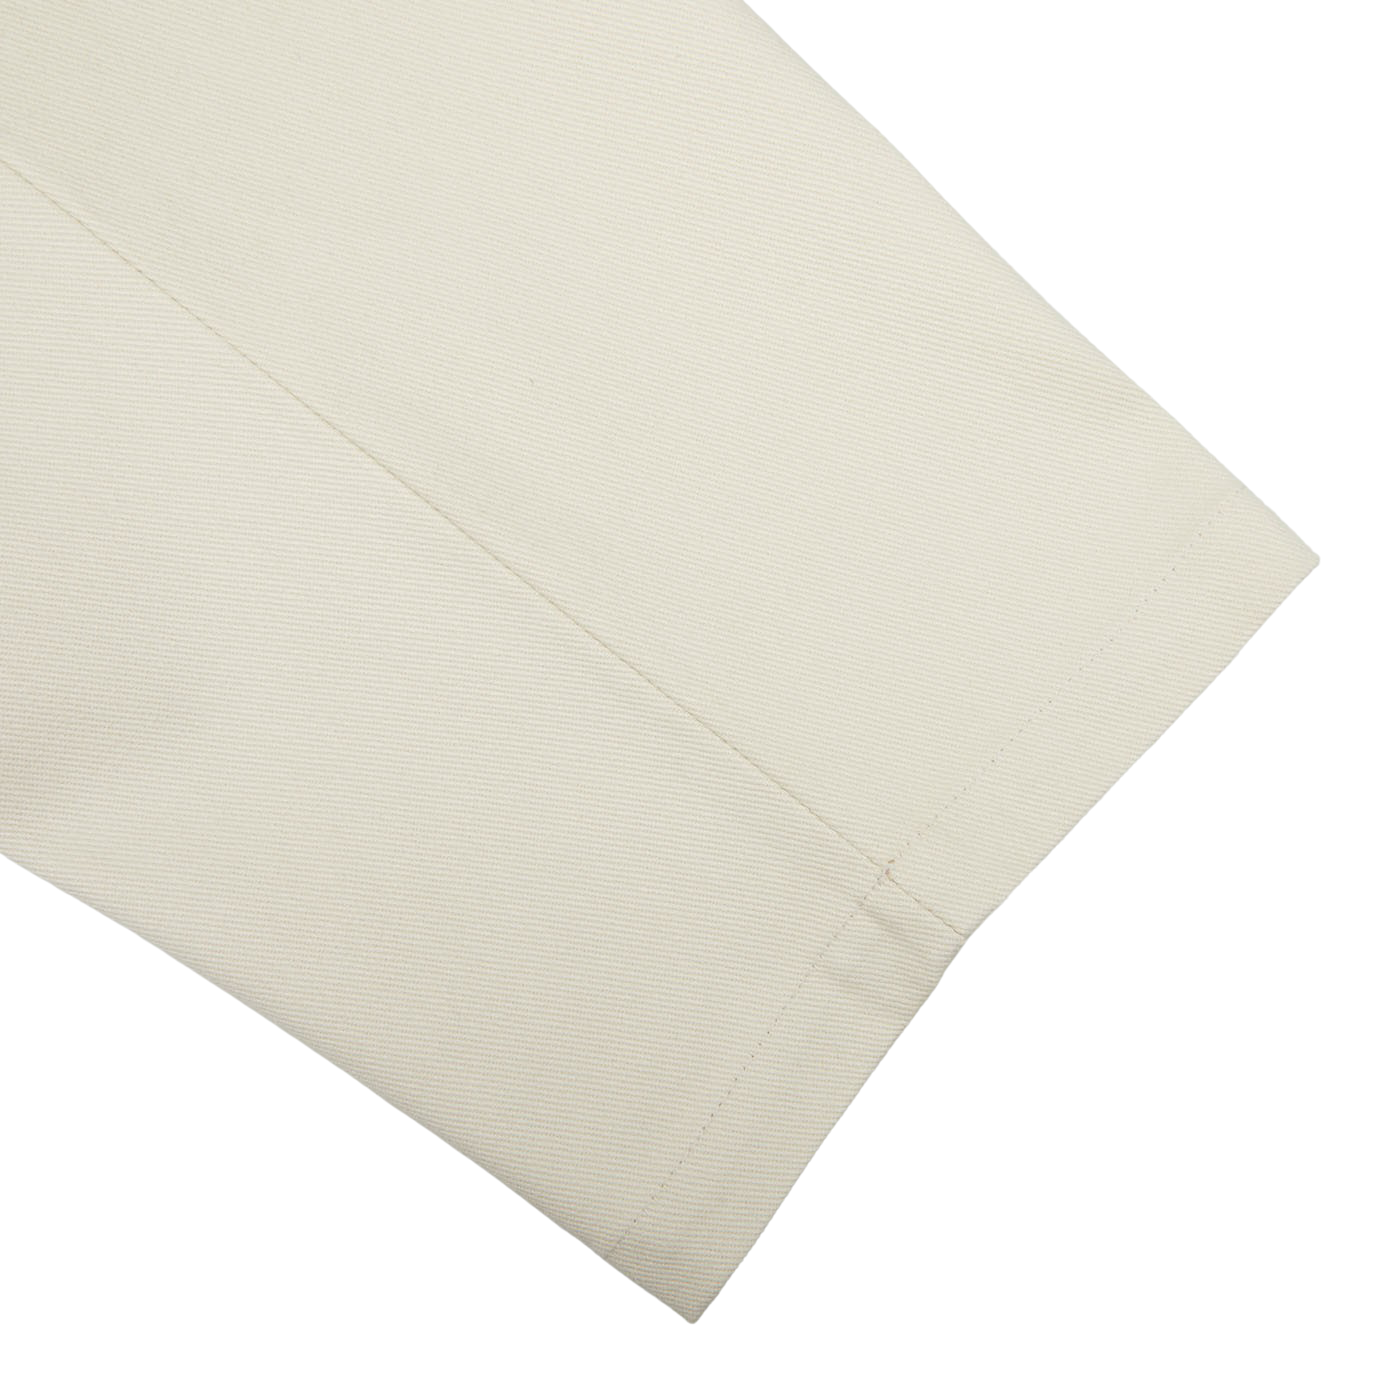 Close-up of De Bonne Facture undyed heavy cotton drill balloon trousers with visible stitching on a plain background.